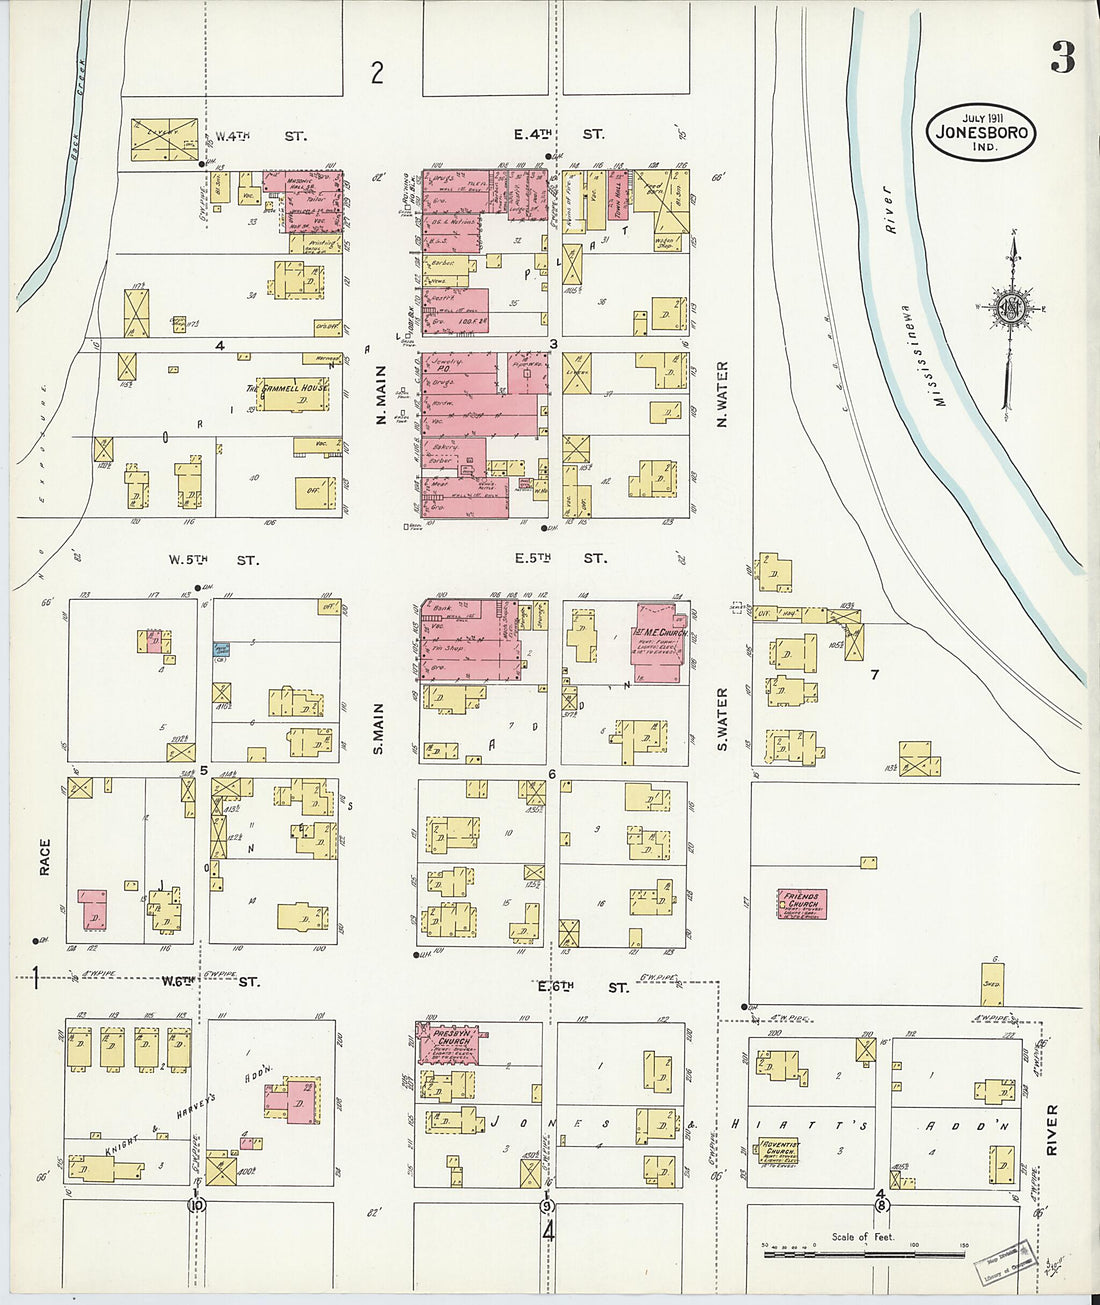 This old map of Jonesboro, Grant County, Indiana was created by Sanborn Map Company in 1911